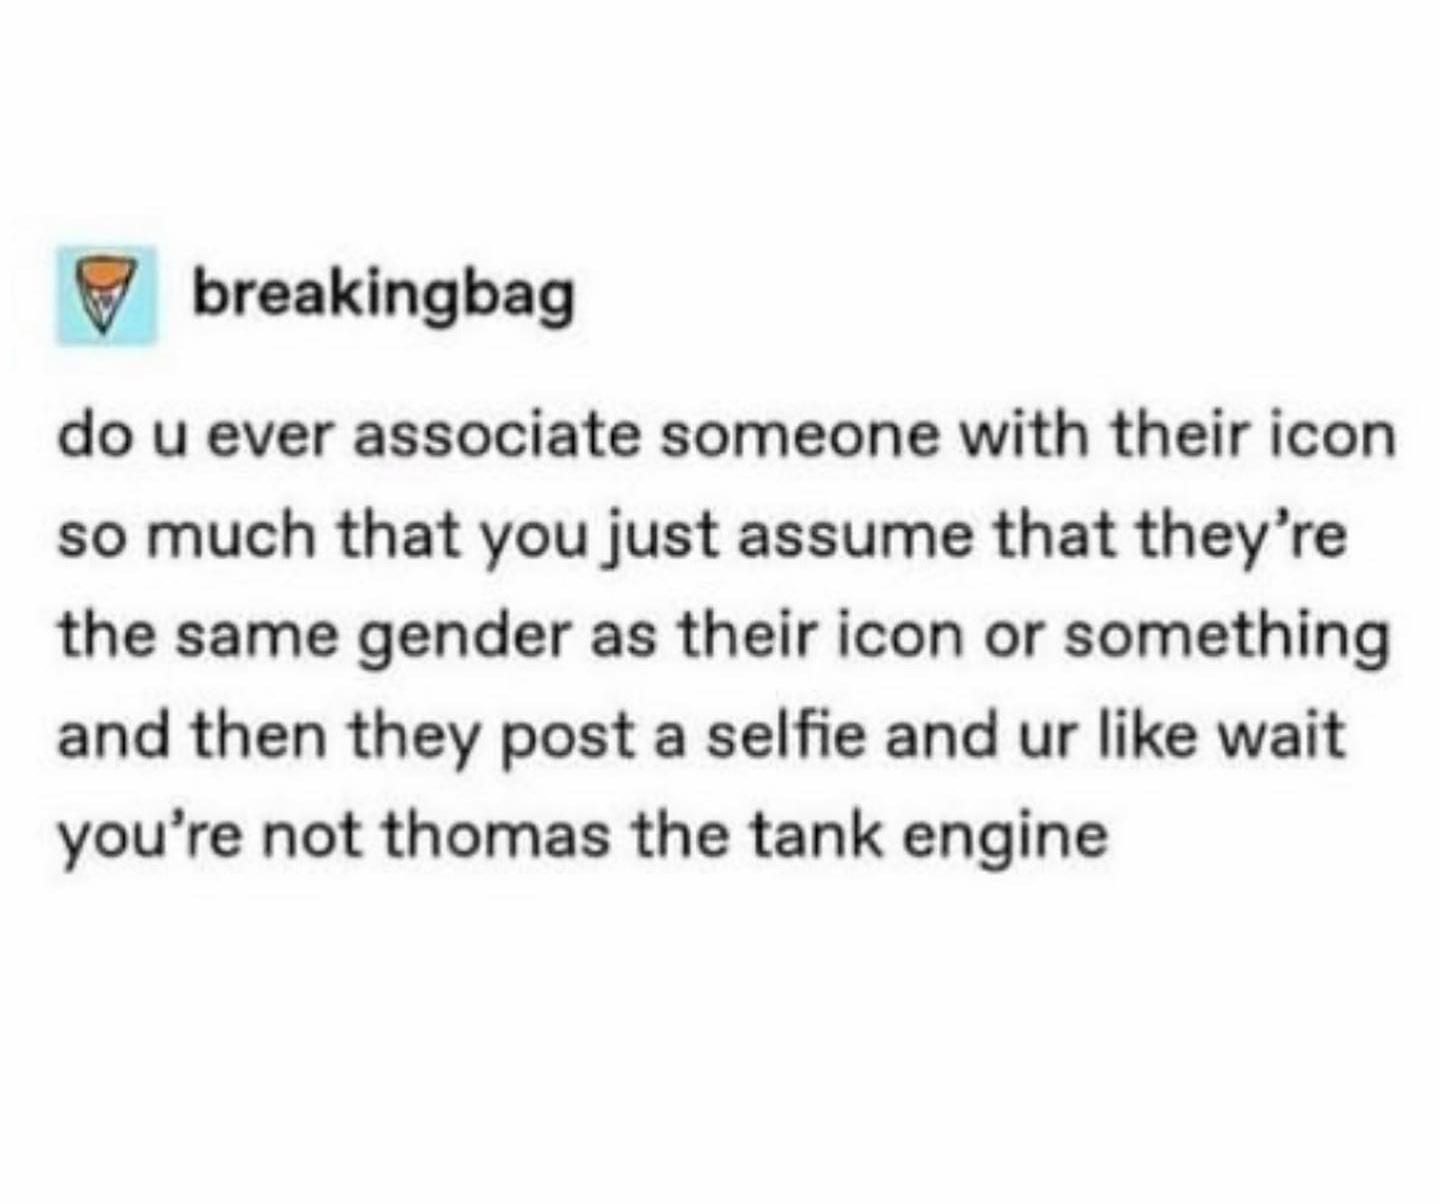 hilarious memes - dank memes - The Death Cure - breakingbag do u ever associate someone with their icon so much that you just assume that they're the same gender as their icon or something and then they post a selfie and ur wait you're not thomas the tank